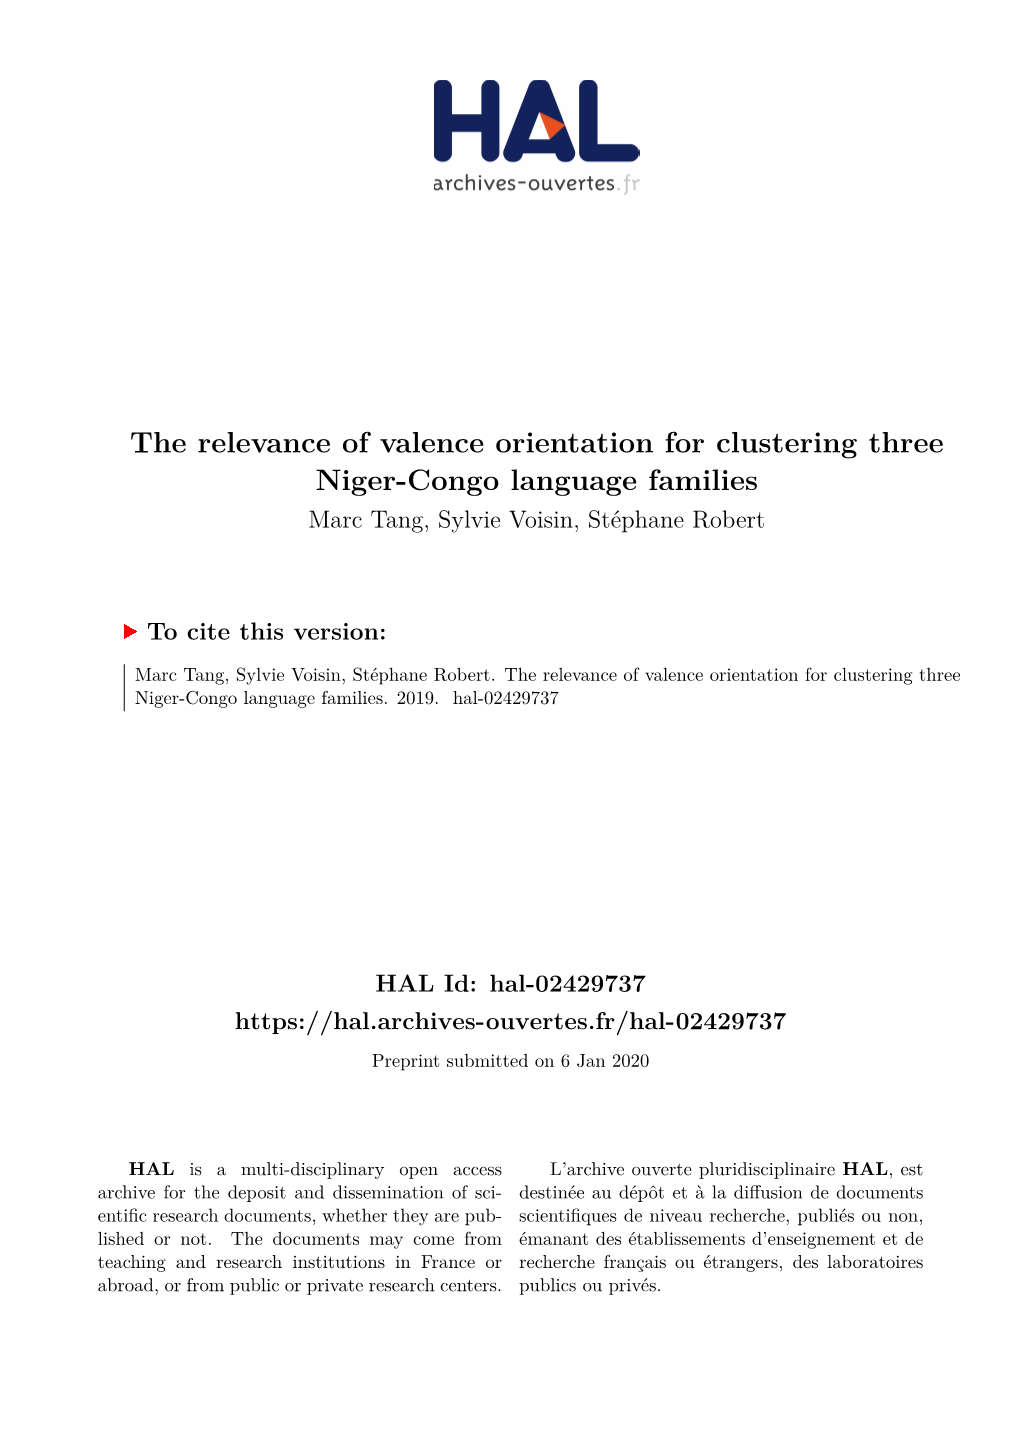 The Relevance of Valence Orientation for Clustering Three Niger-Congo Language Families Marc Tang, Sylvie Voisin, Stéphane Robert